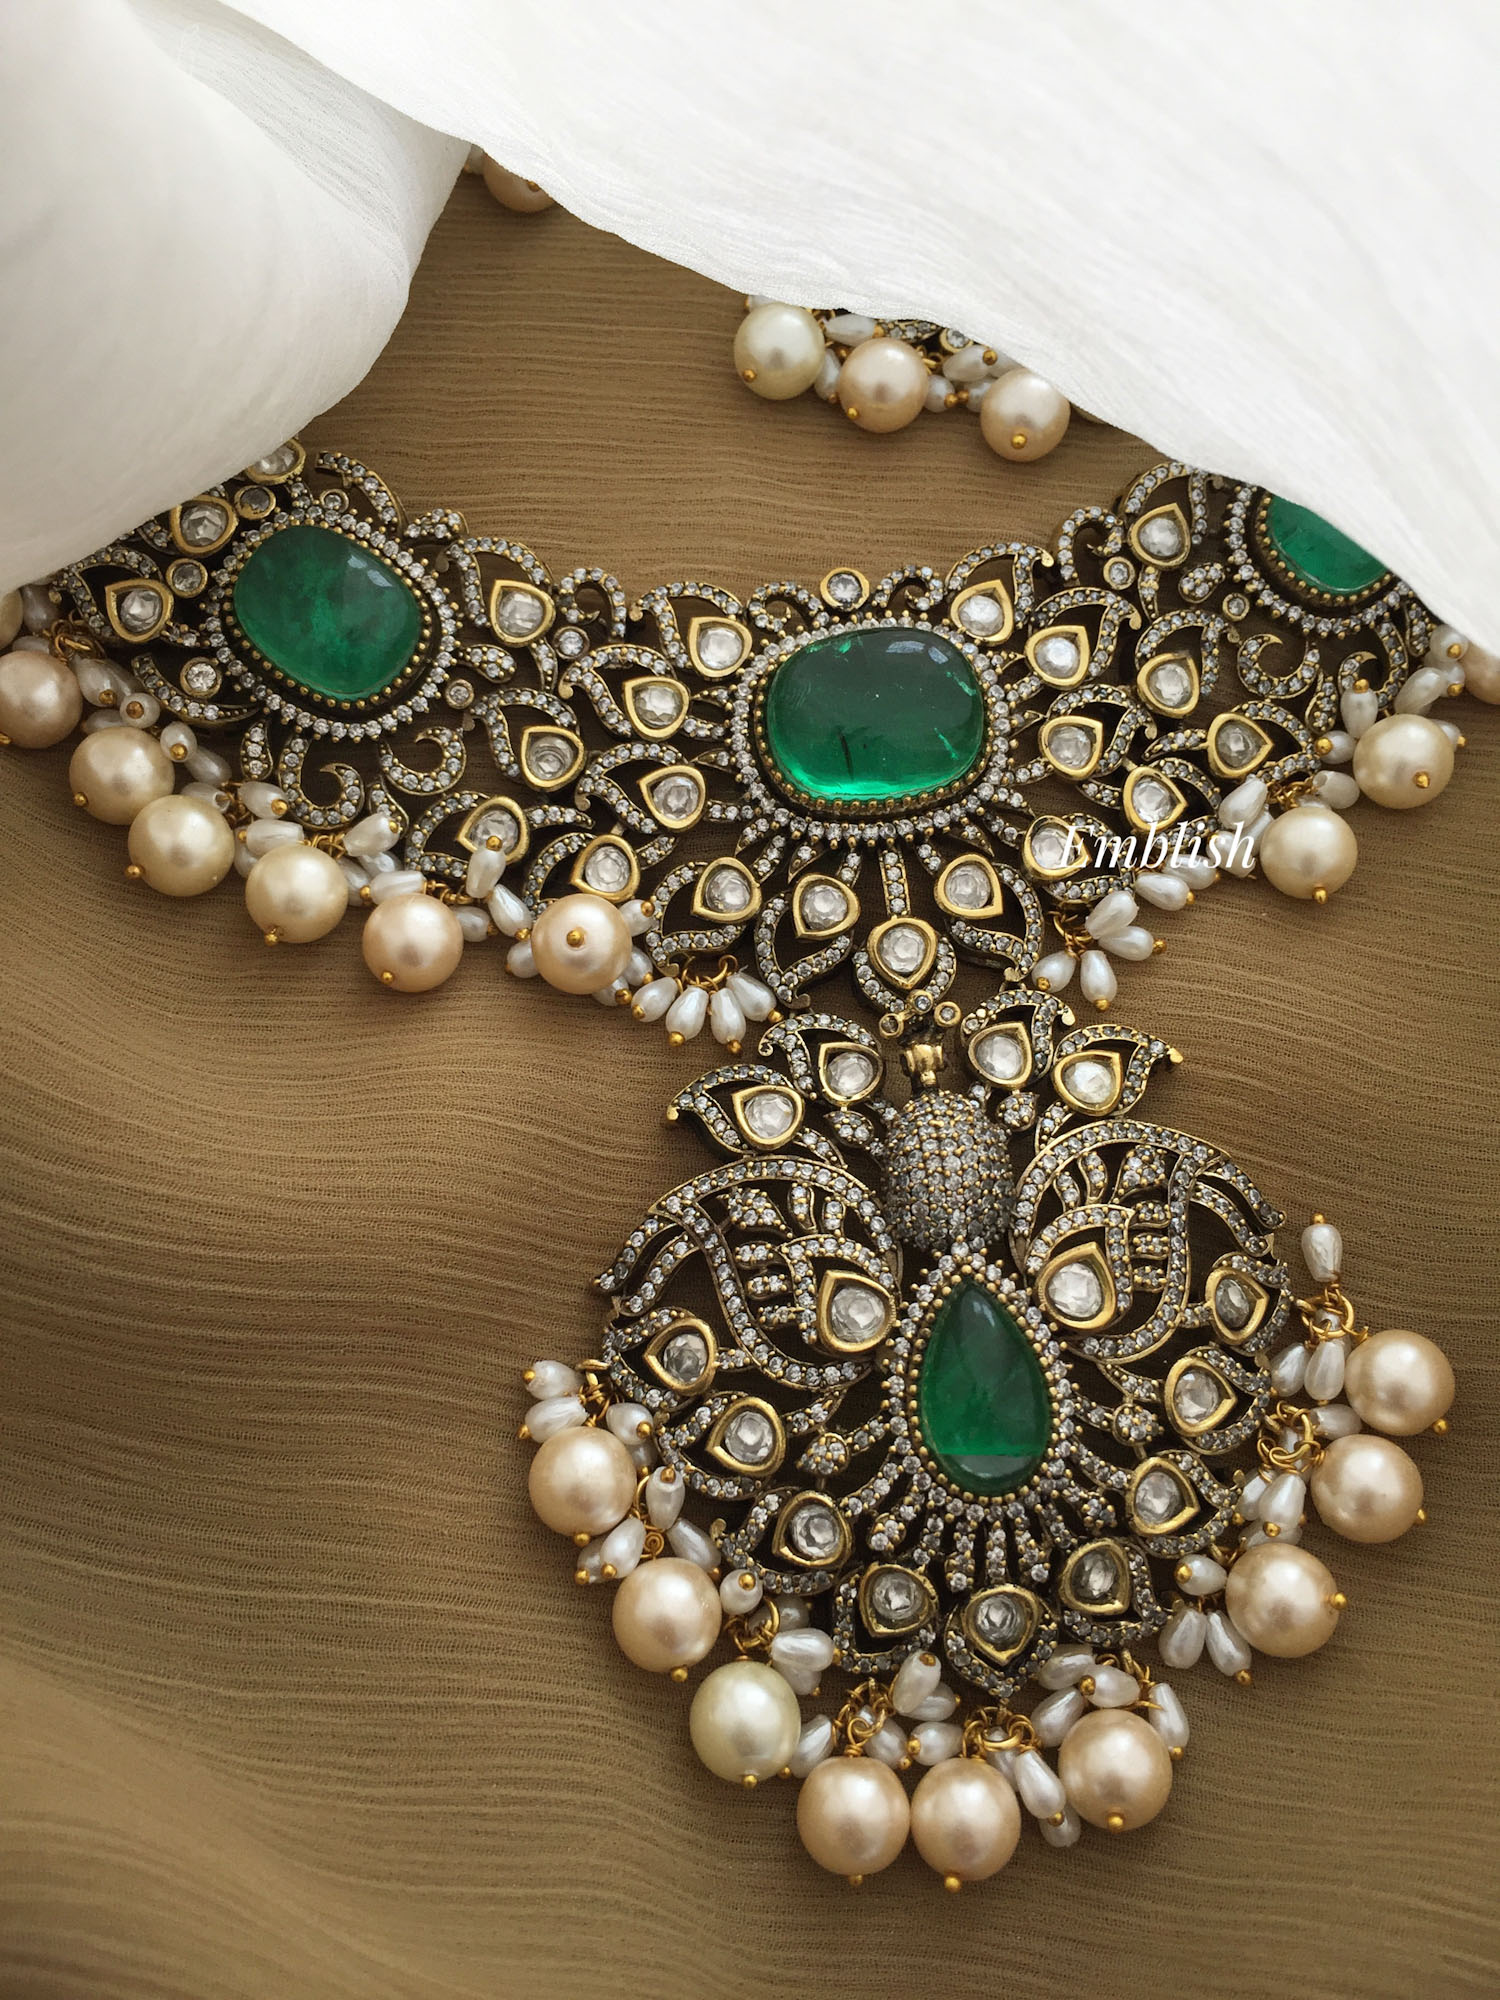 Grand Victorian Dancing Peacock with Rice Pearl Neckpiece